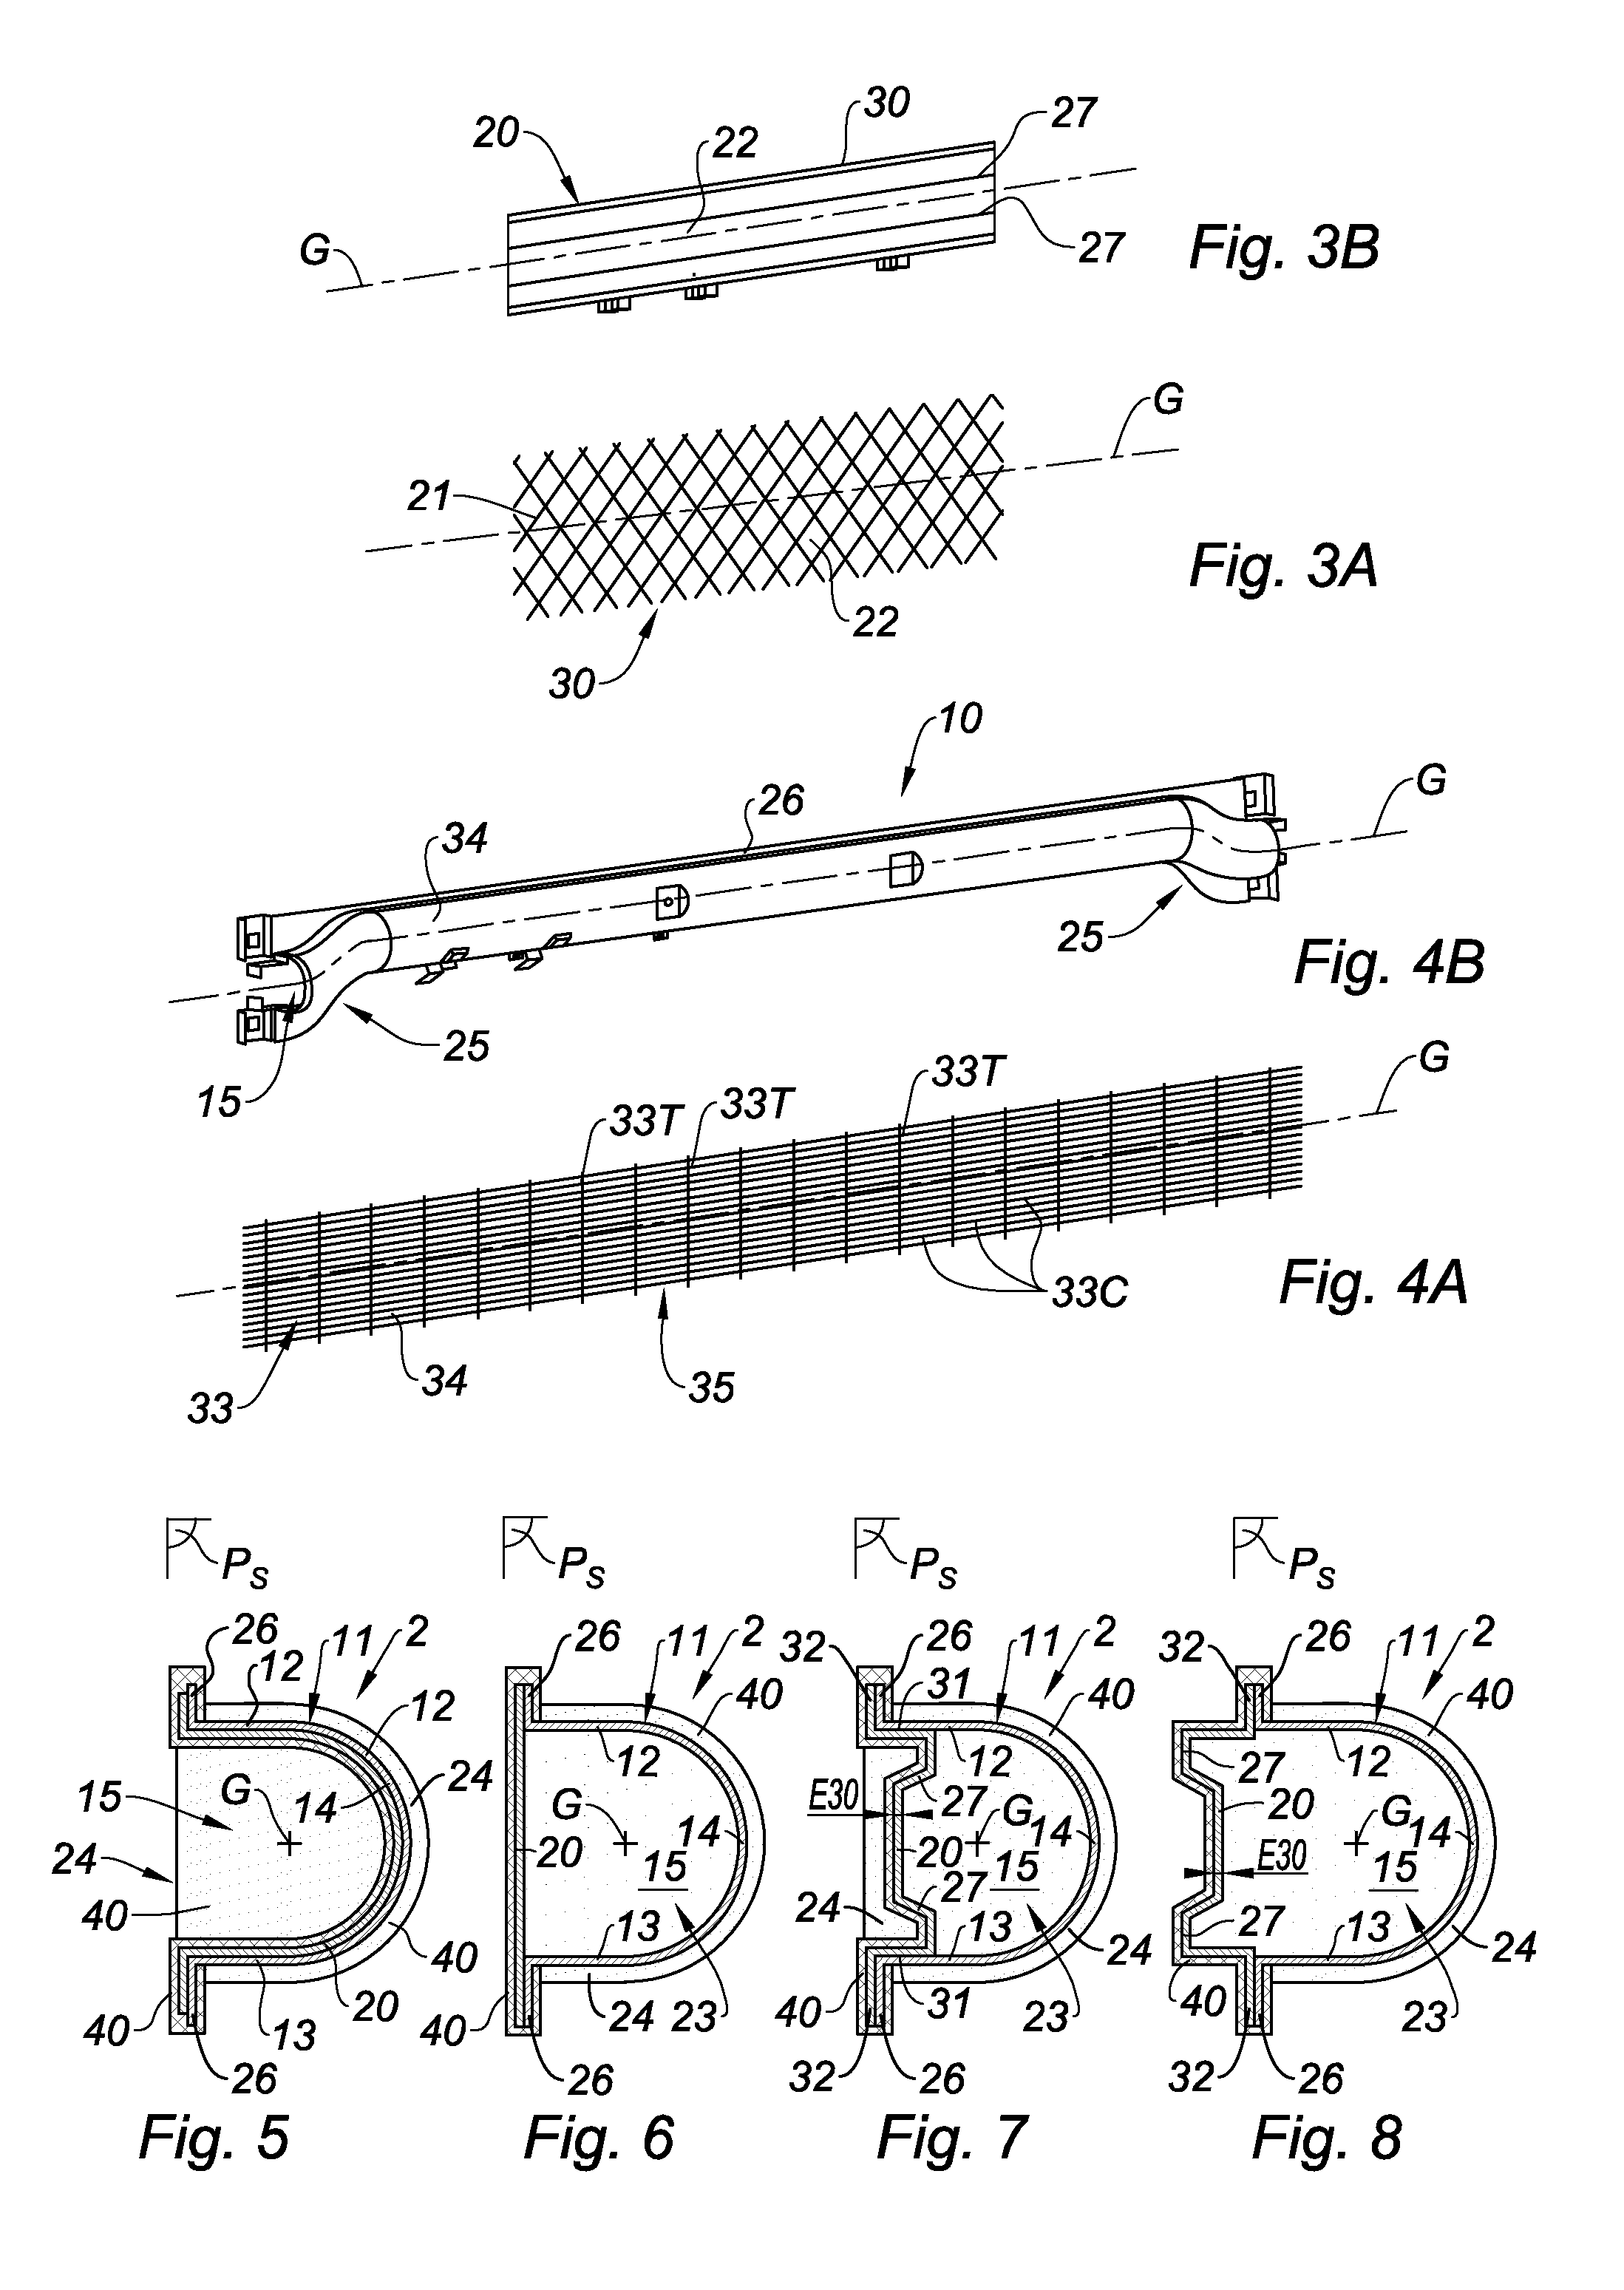 Crossmember for a Vehicle Dashboard Provided with a Reinforcing Back Brace Made of a Fibrous Composite